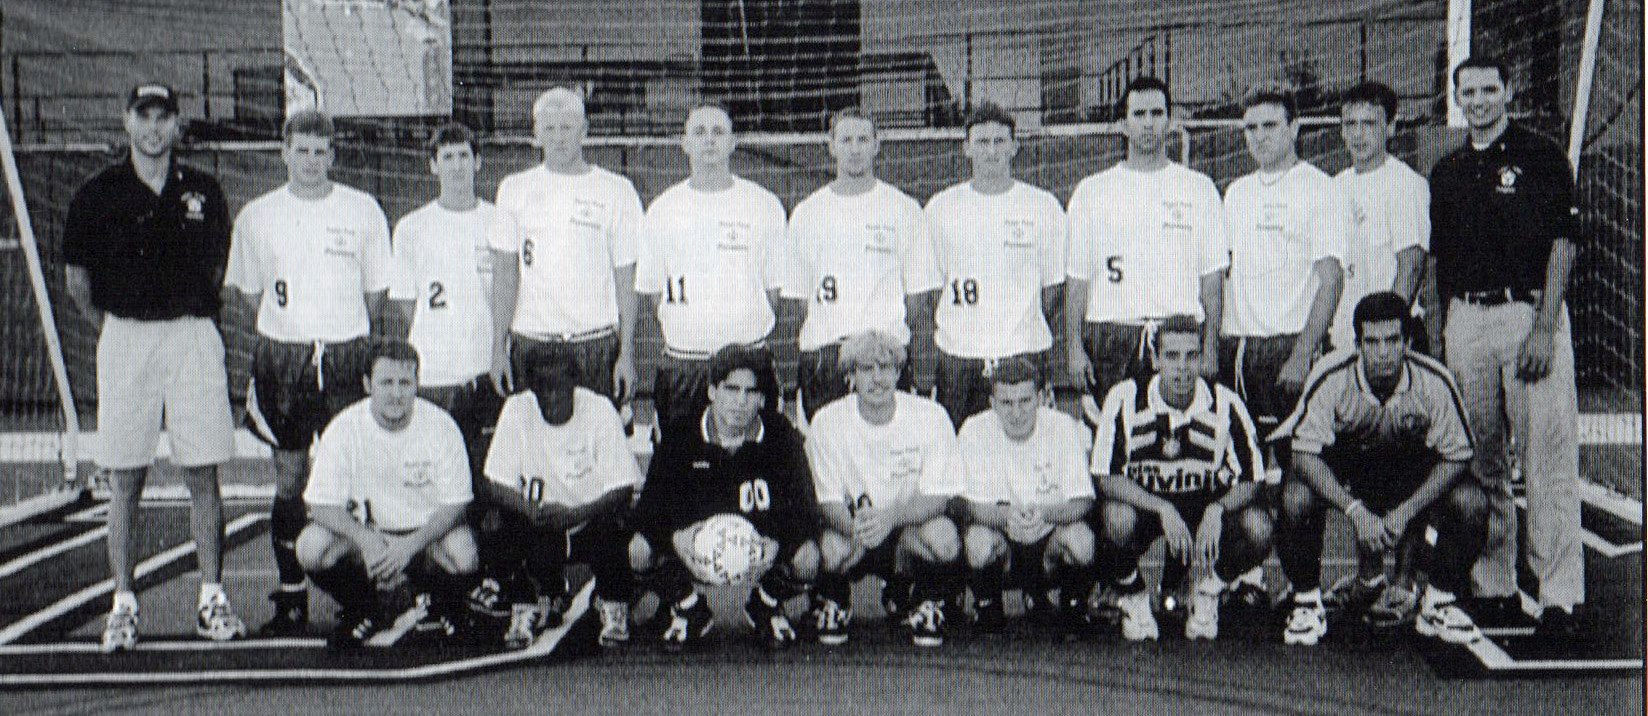 Larry Fingers, front row, fourth from left, played on the 1998 Point Park men's soccer team coached by Pittsburgh Soccer Report's John Krysinsky